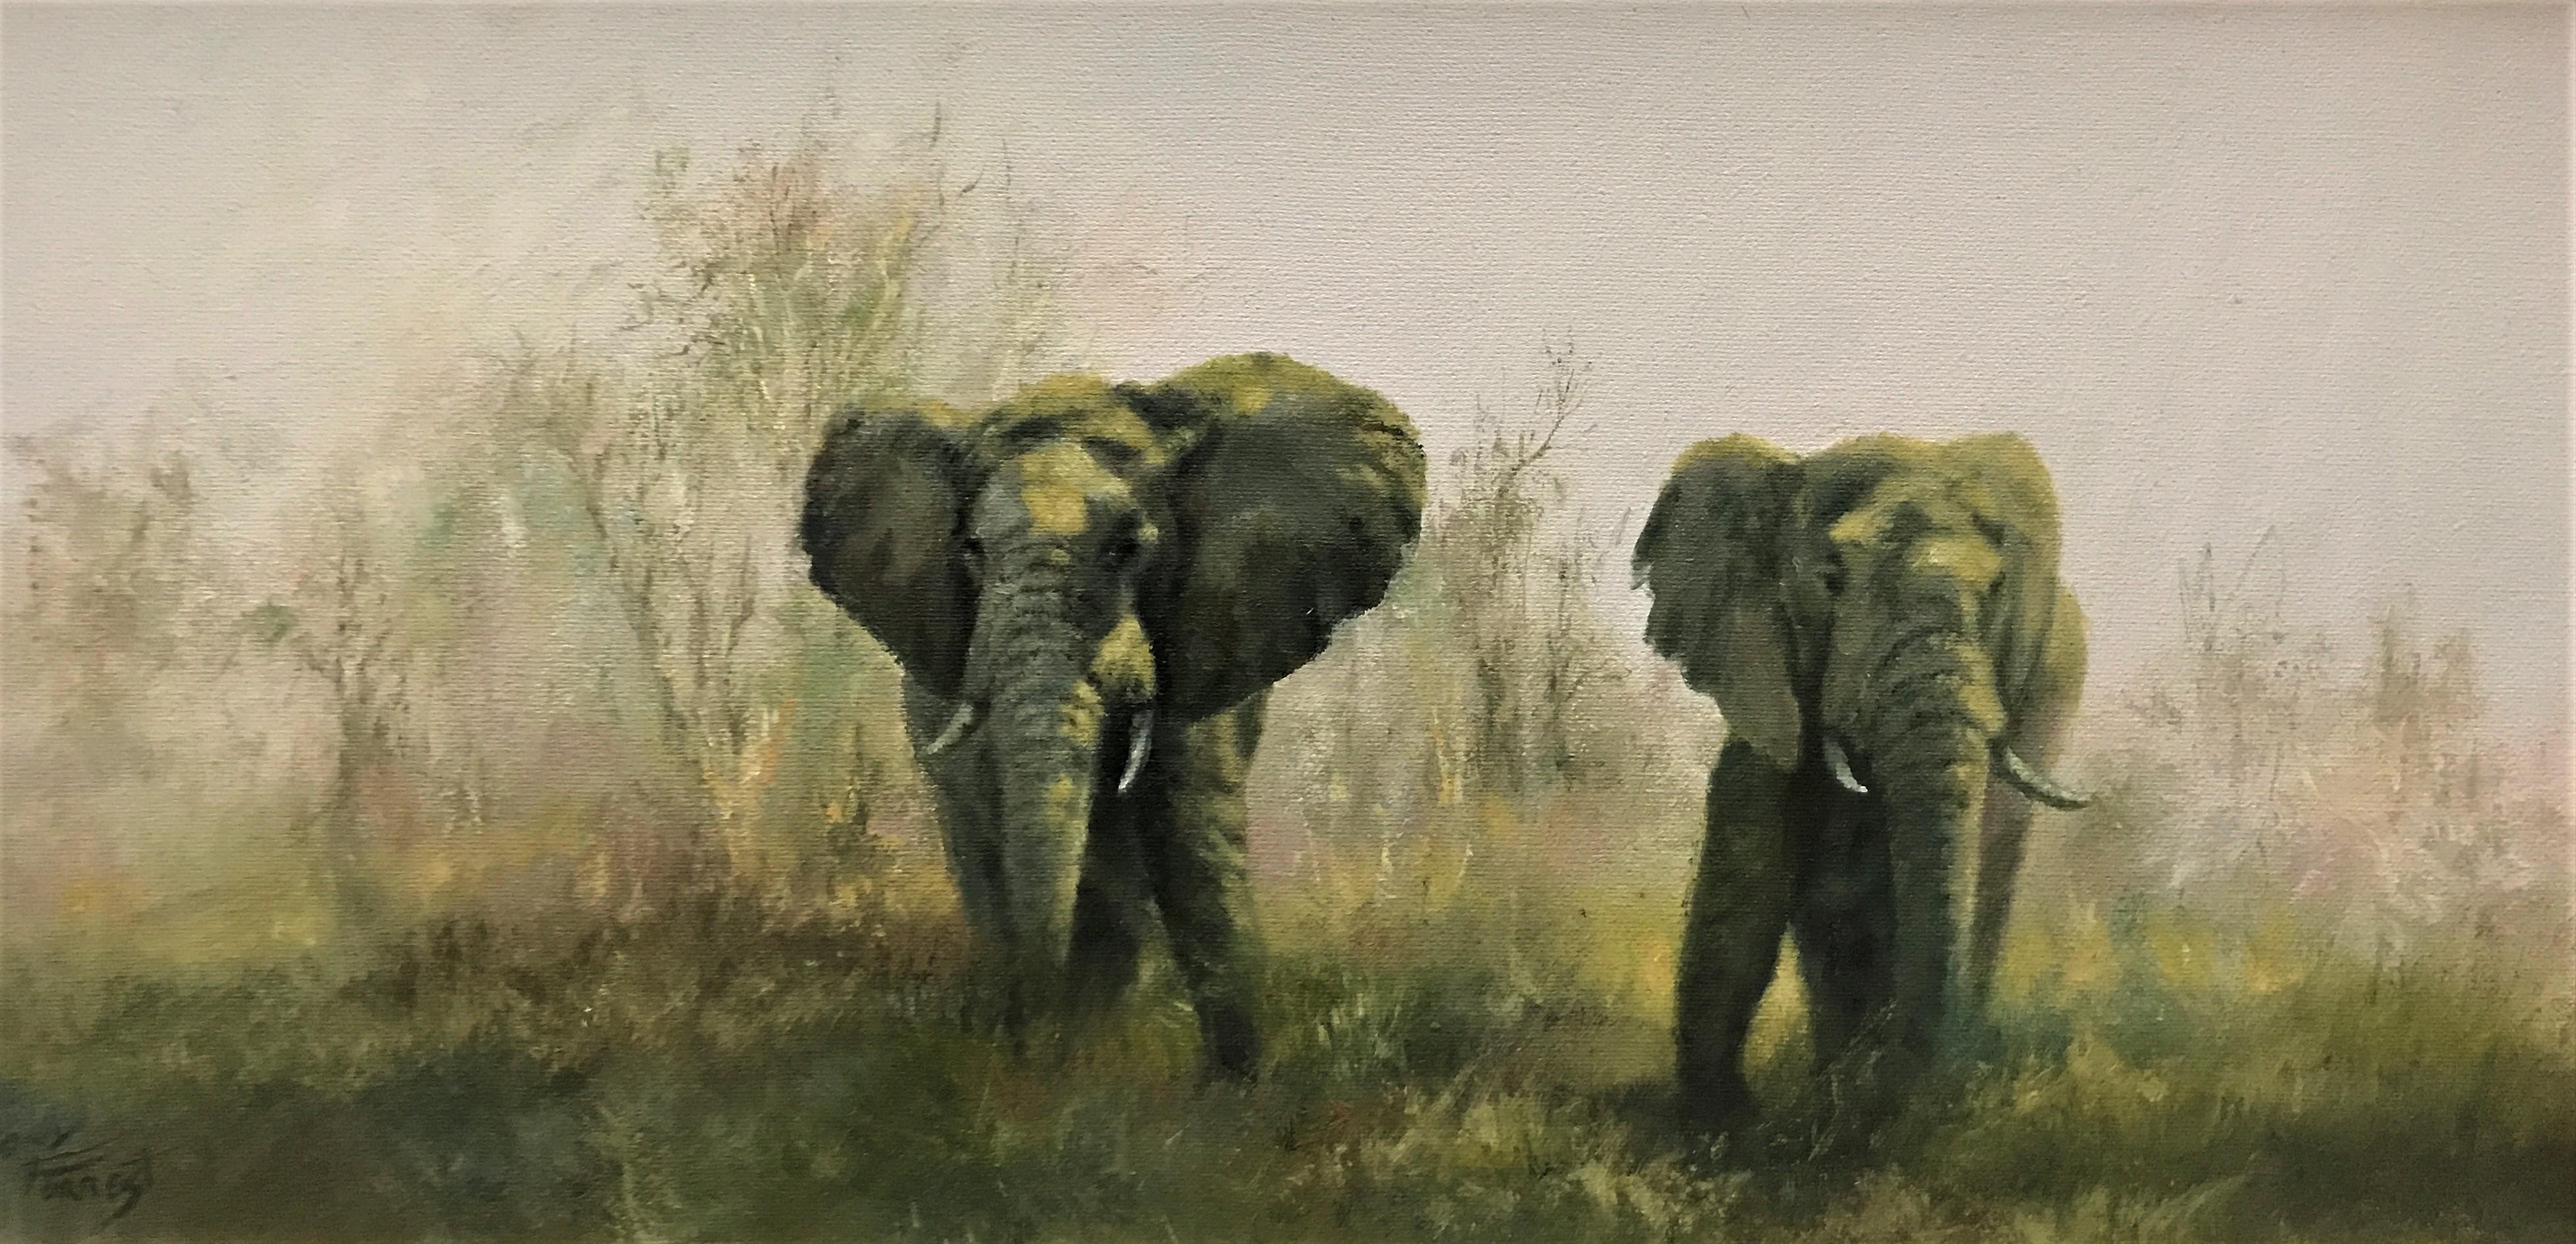 Tony Forrest Landscape Painting - Roused Elephants in Savannah, original oil on canvas contemporary British artist